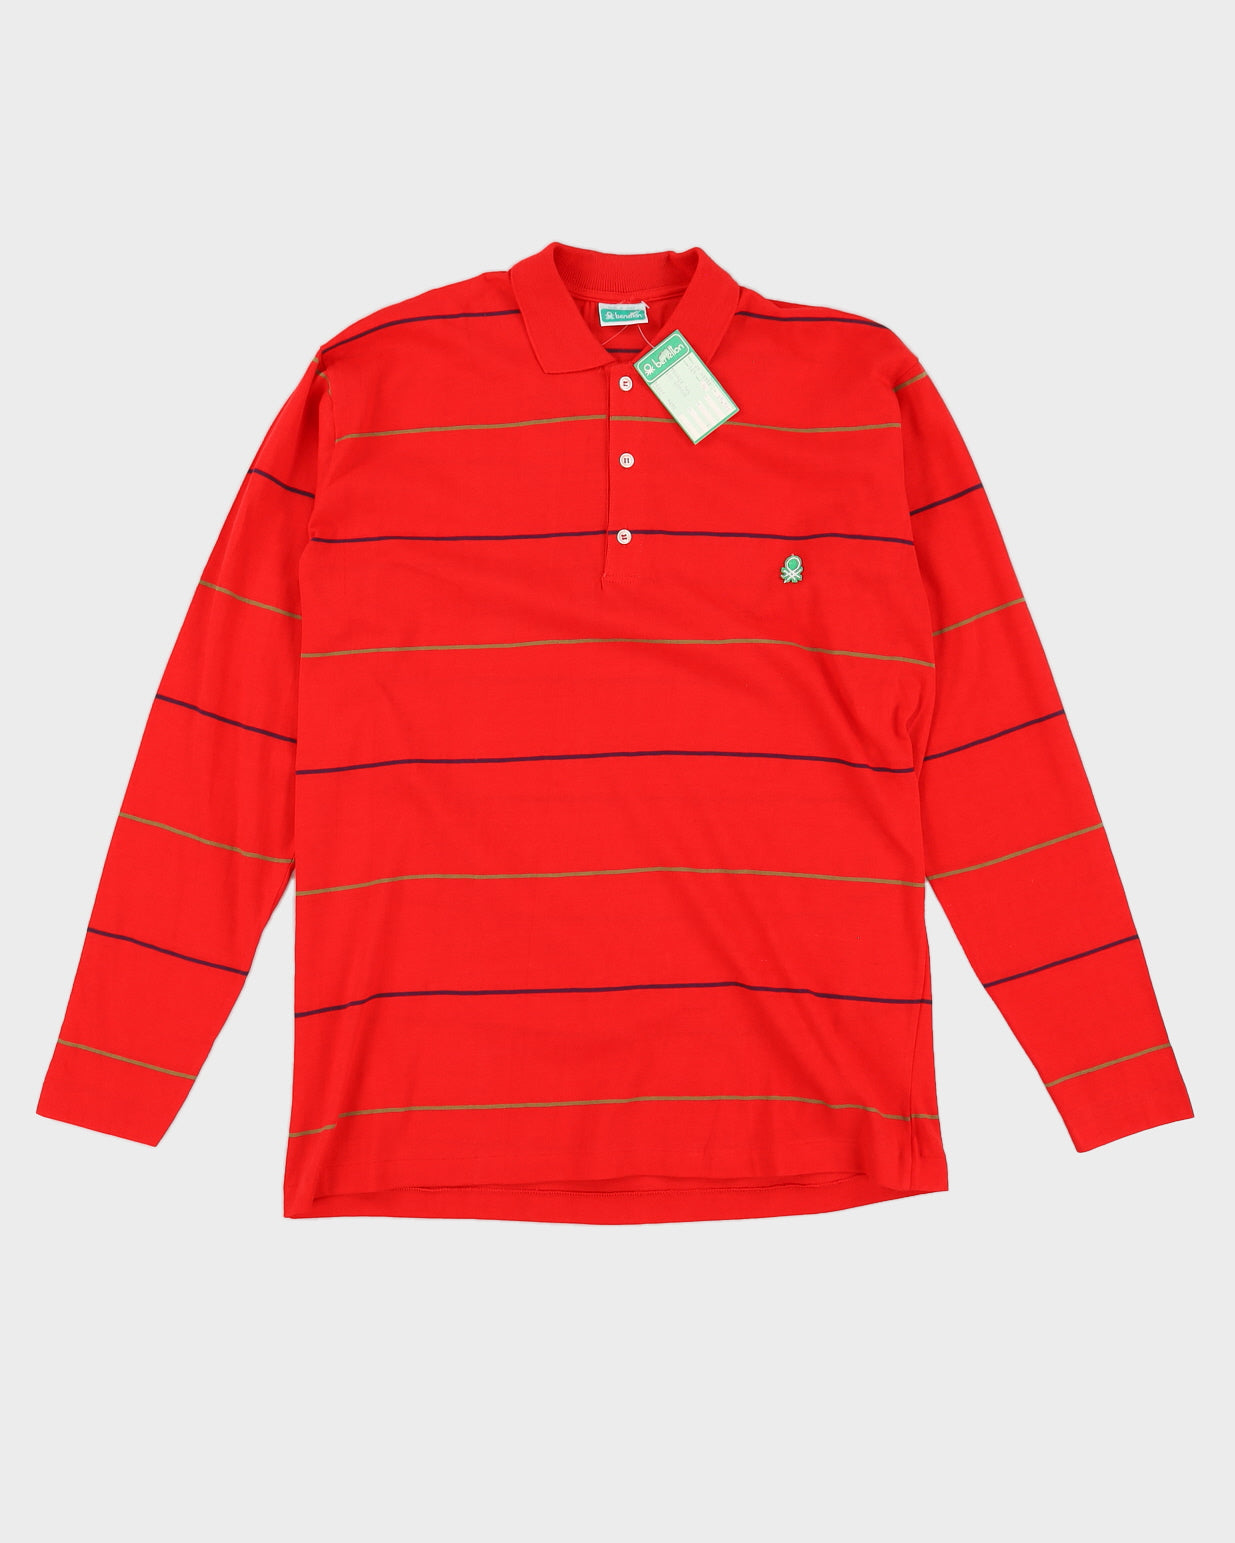 Vintage 70s Benetton Red Striped Long Sleeved Polo Shirt Deadstock With Tags - M